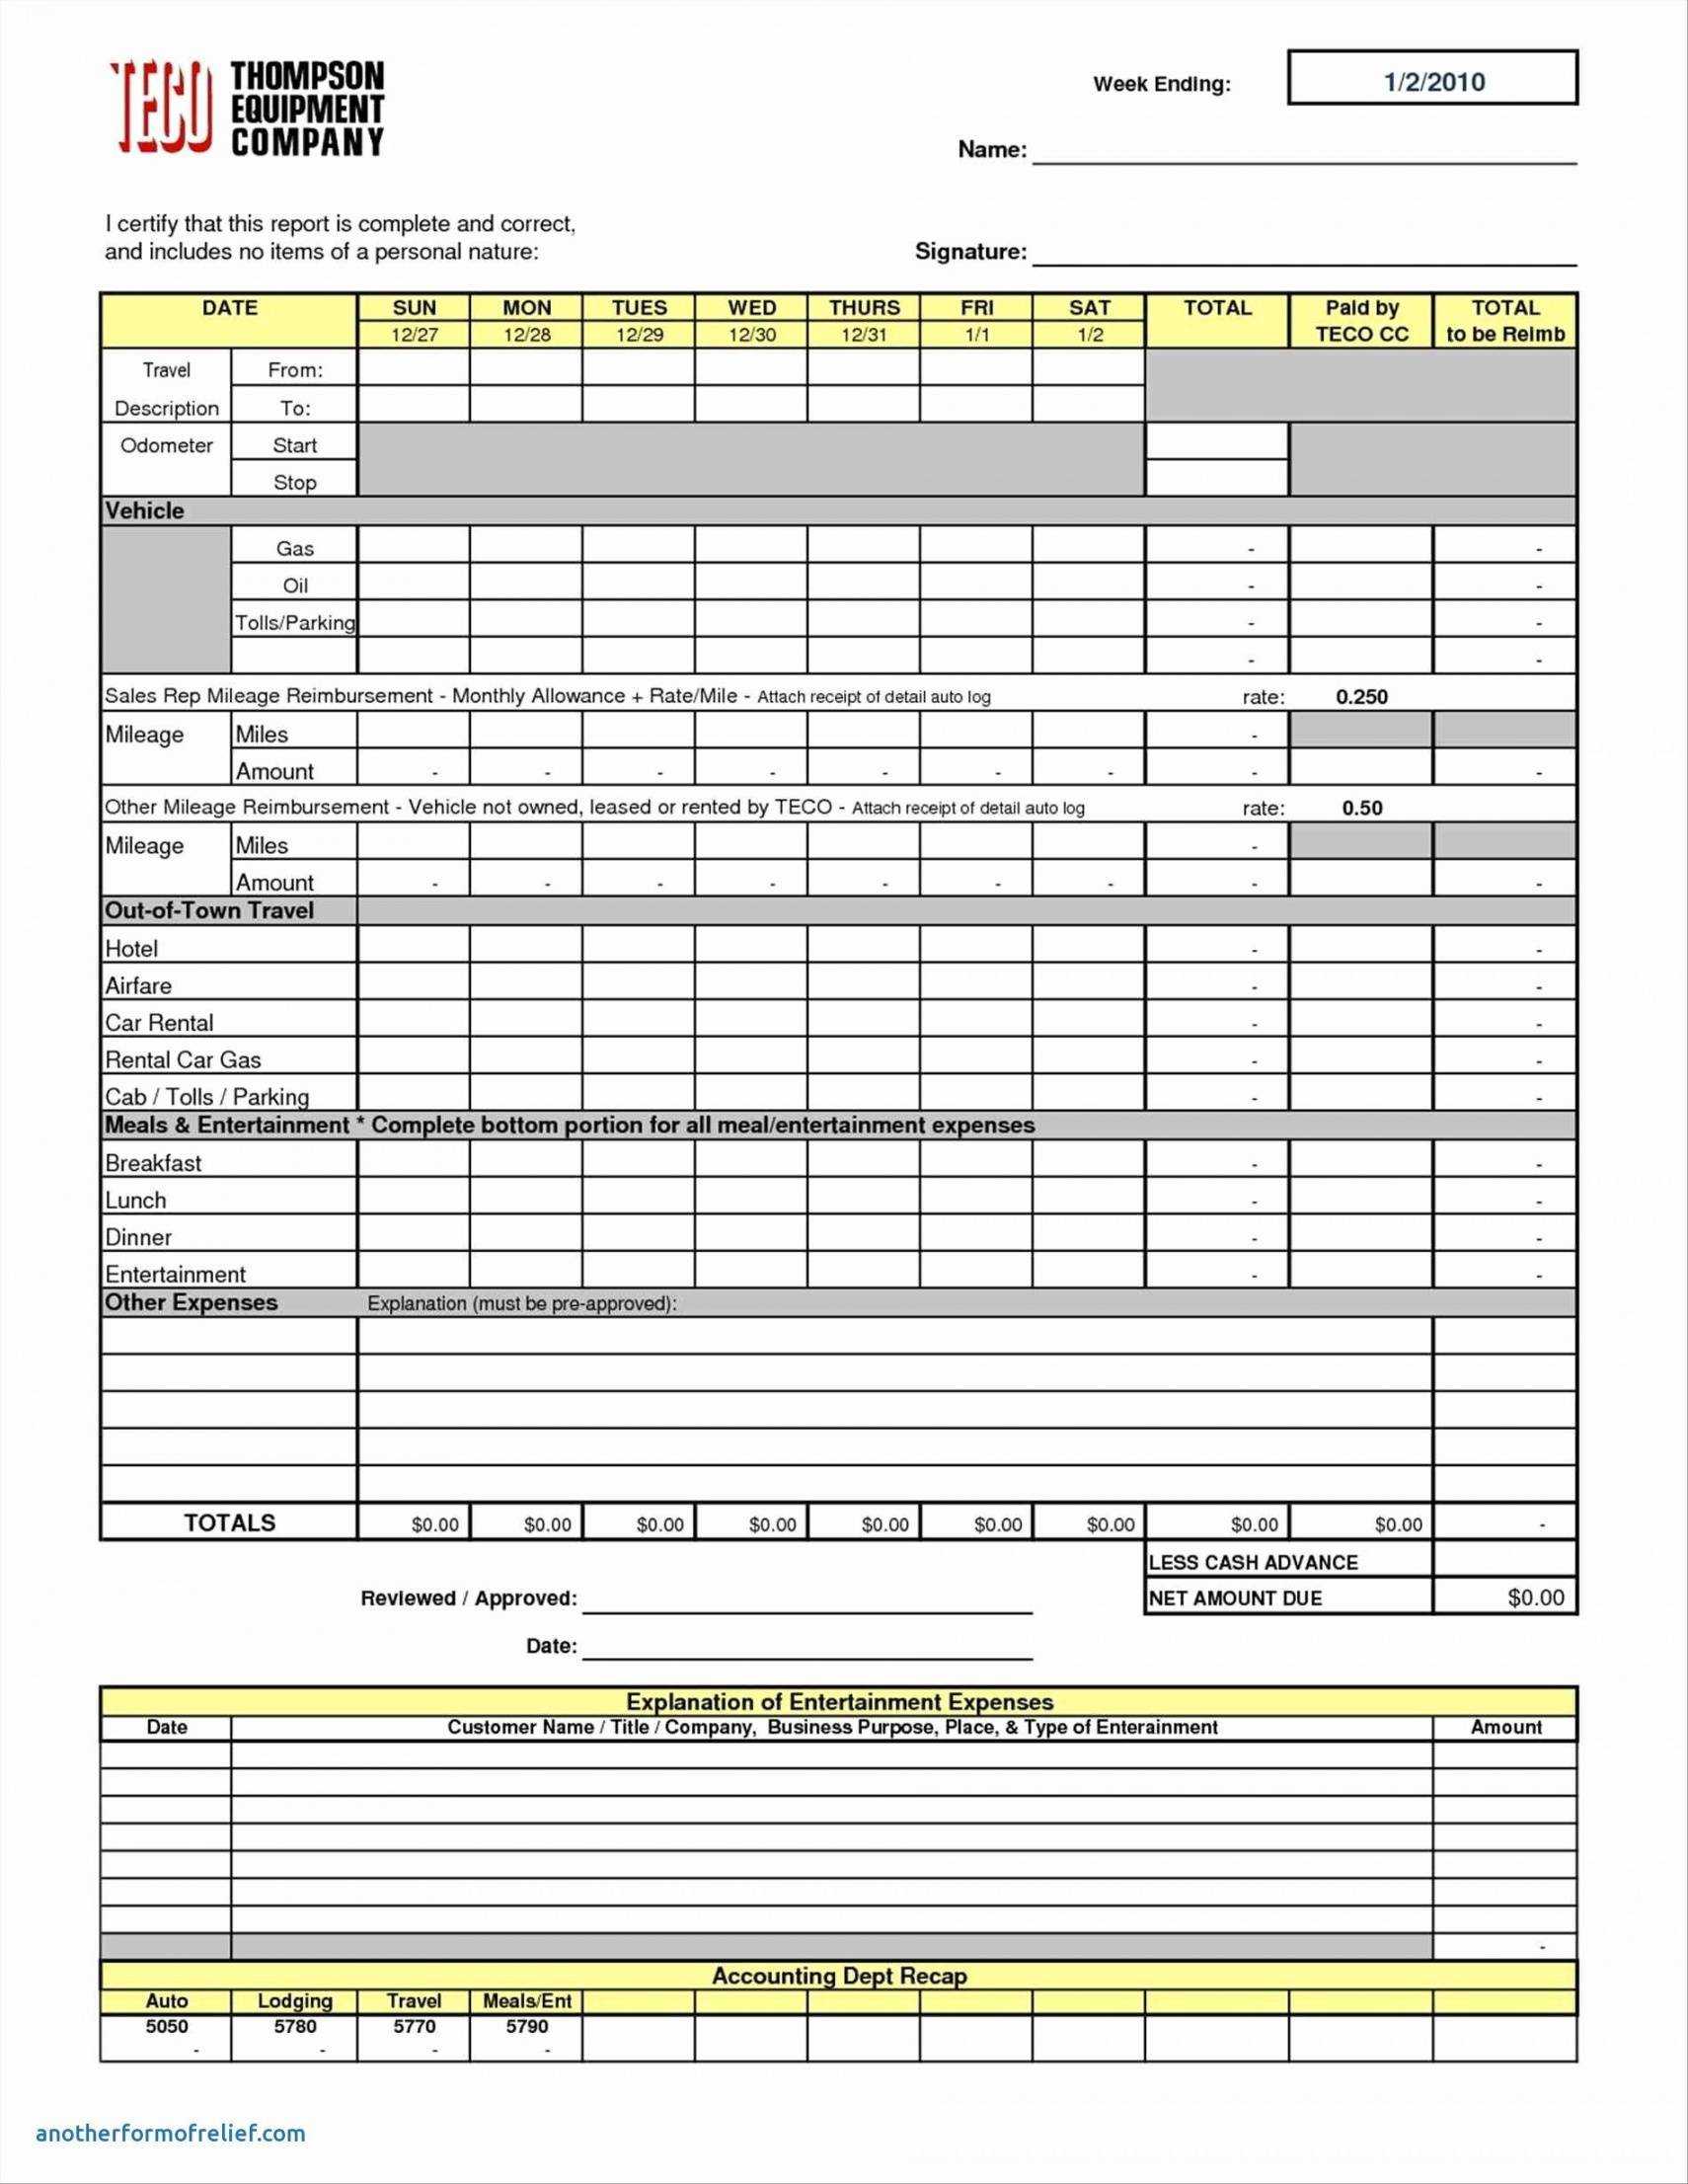 Sample Balance Sheet For Llc Glendale Community Document With Air Balance Report Template